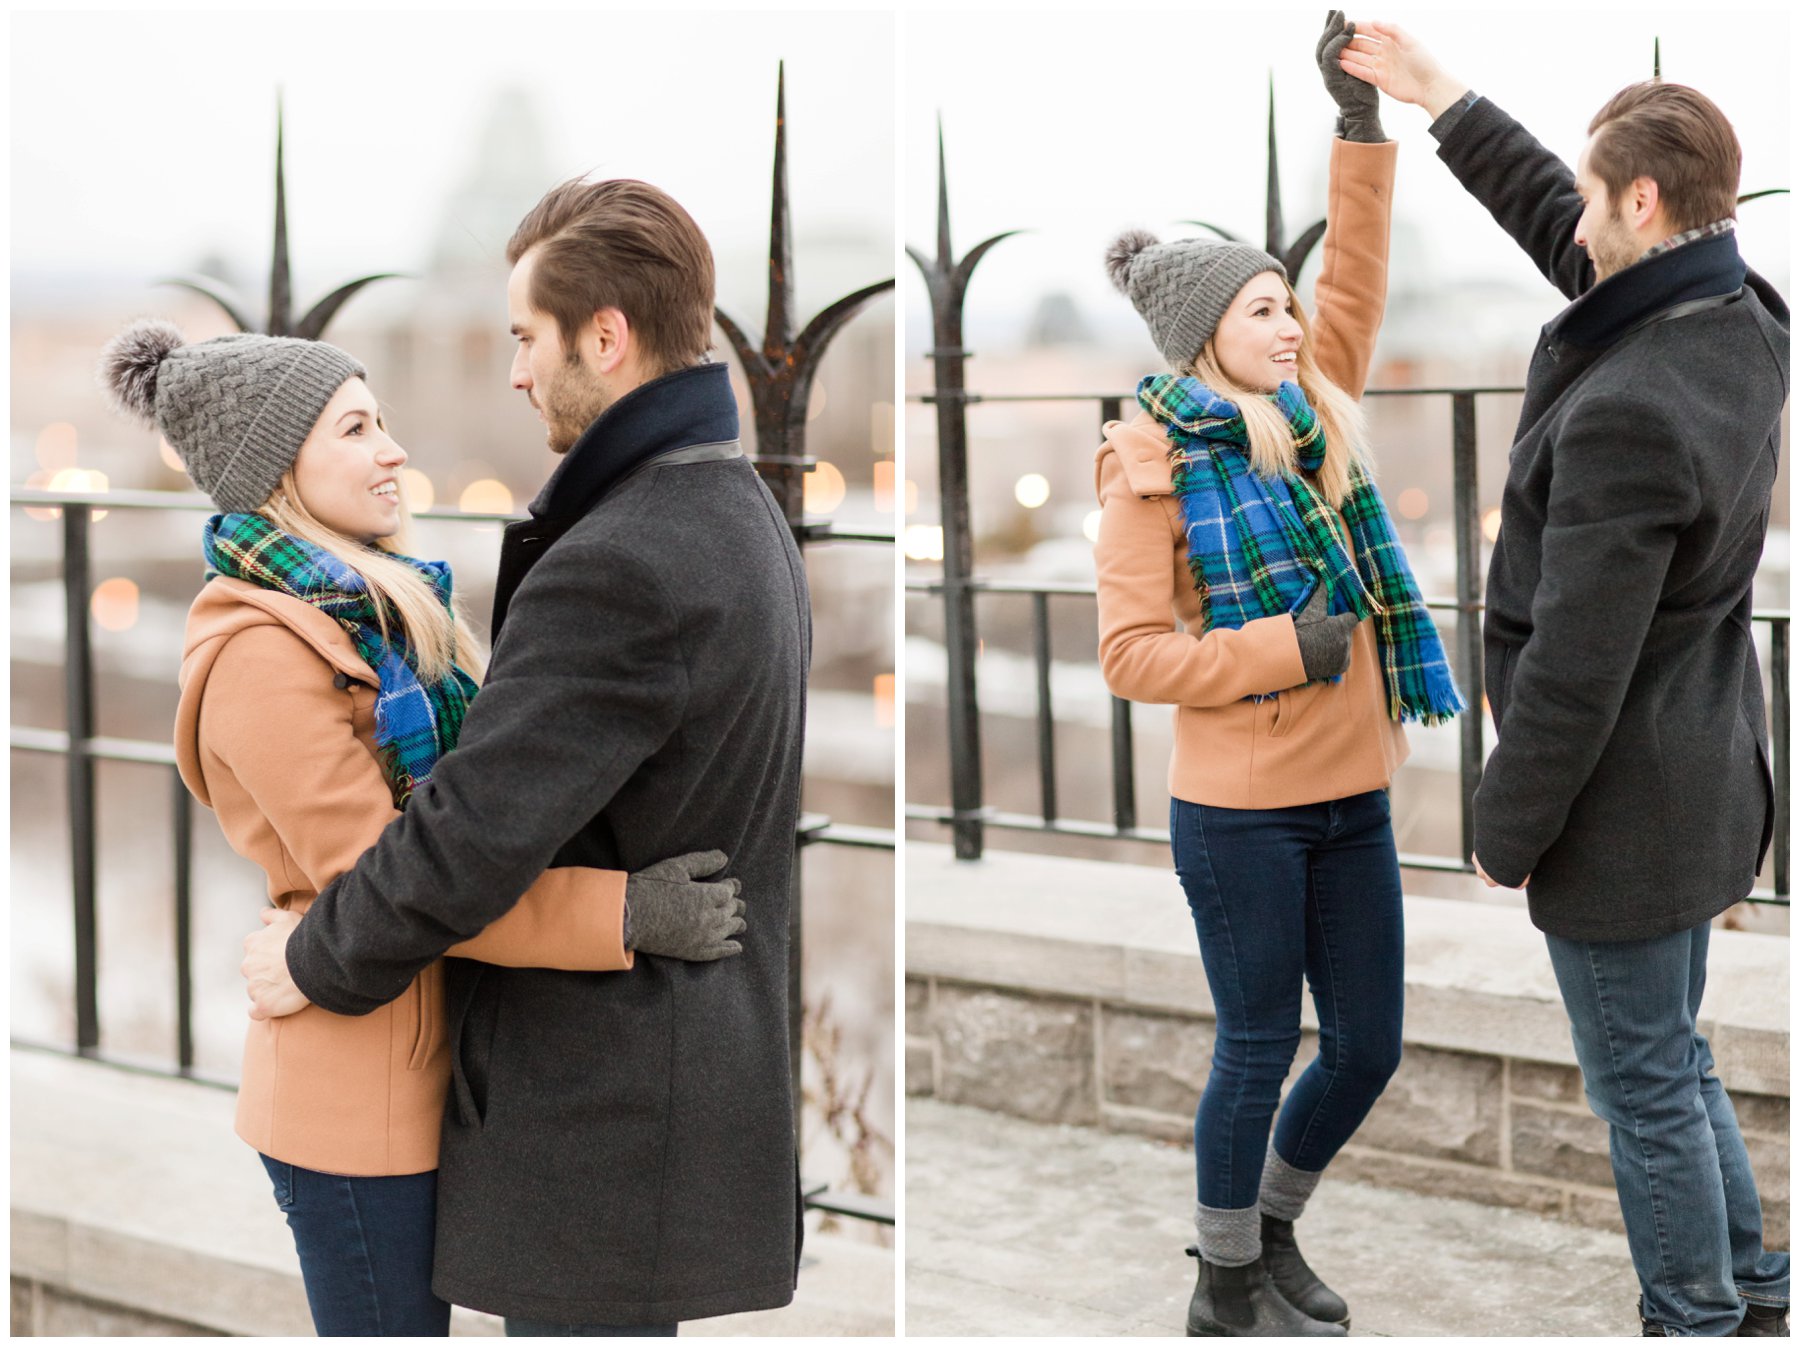 Downtown Ottawa winter engagement session